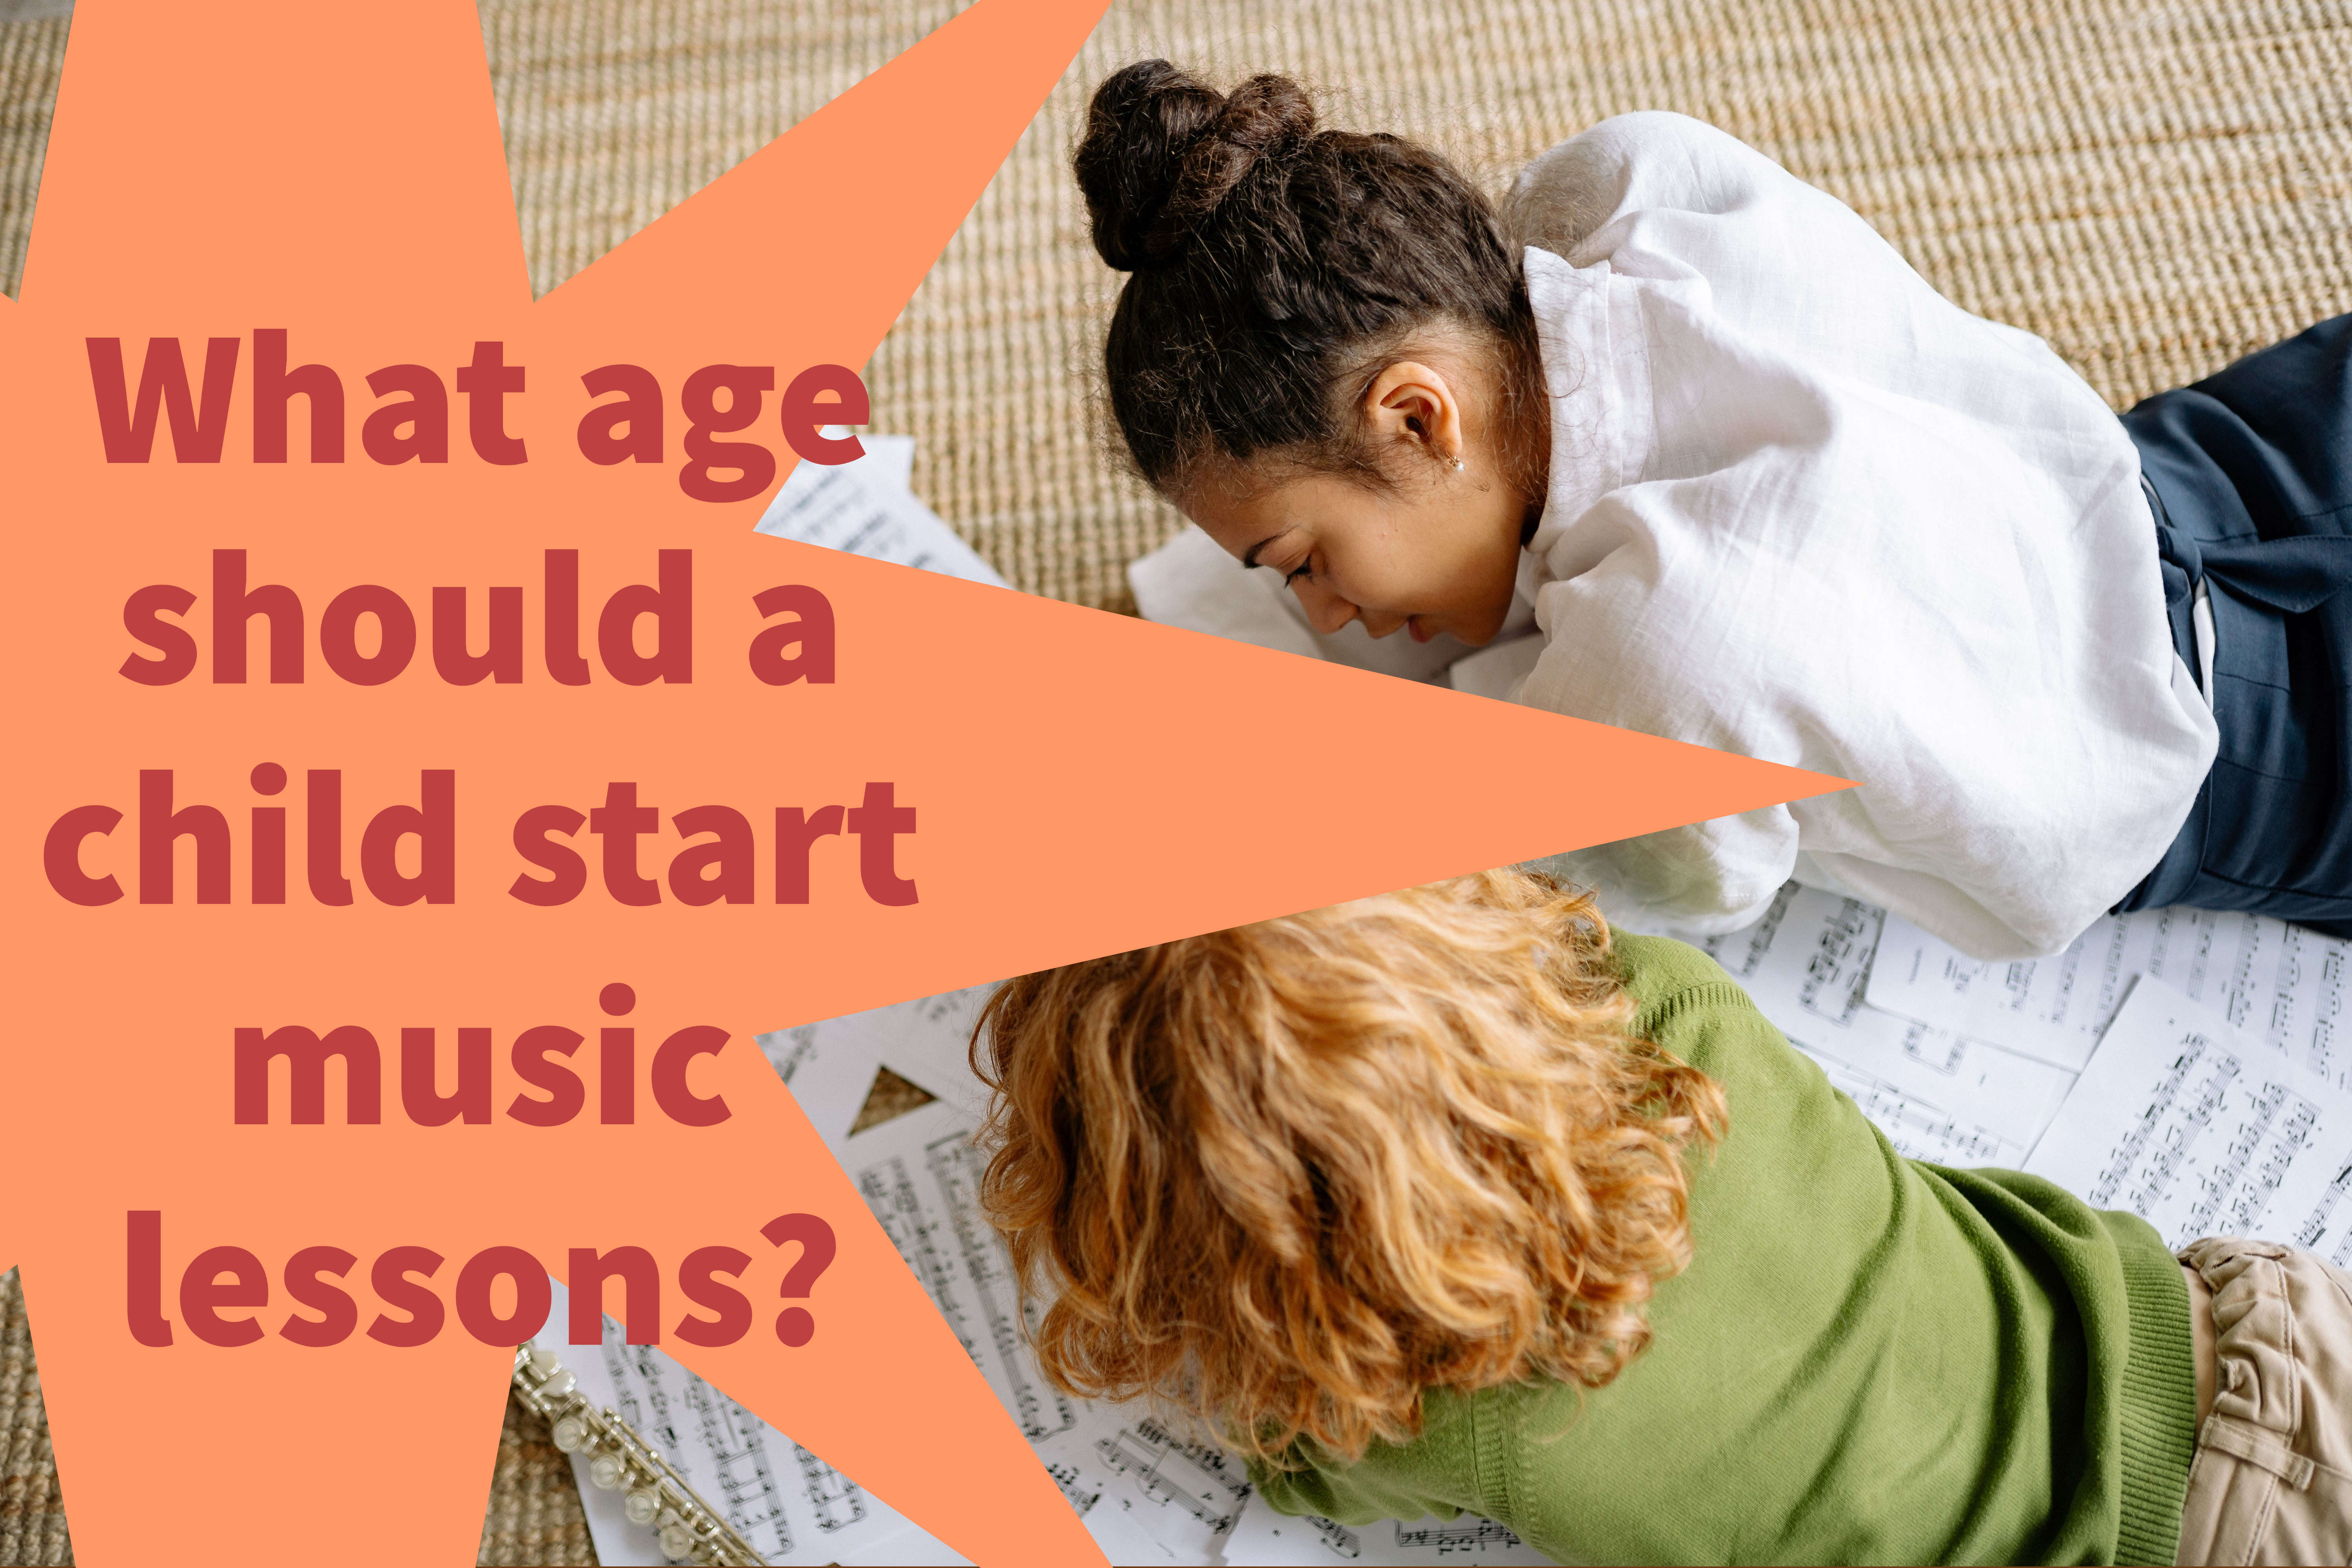 What age should a child start music lessons